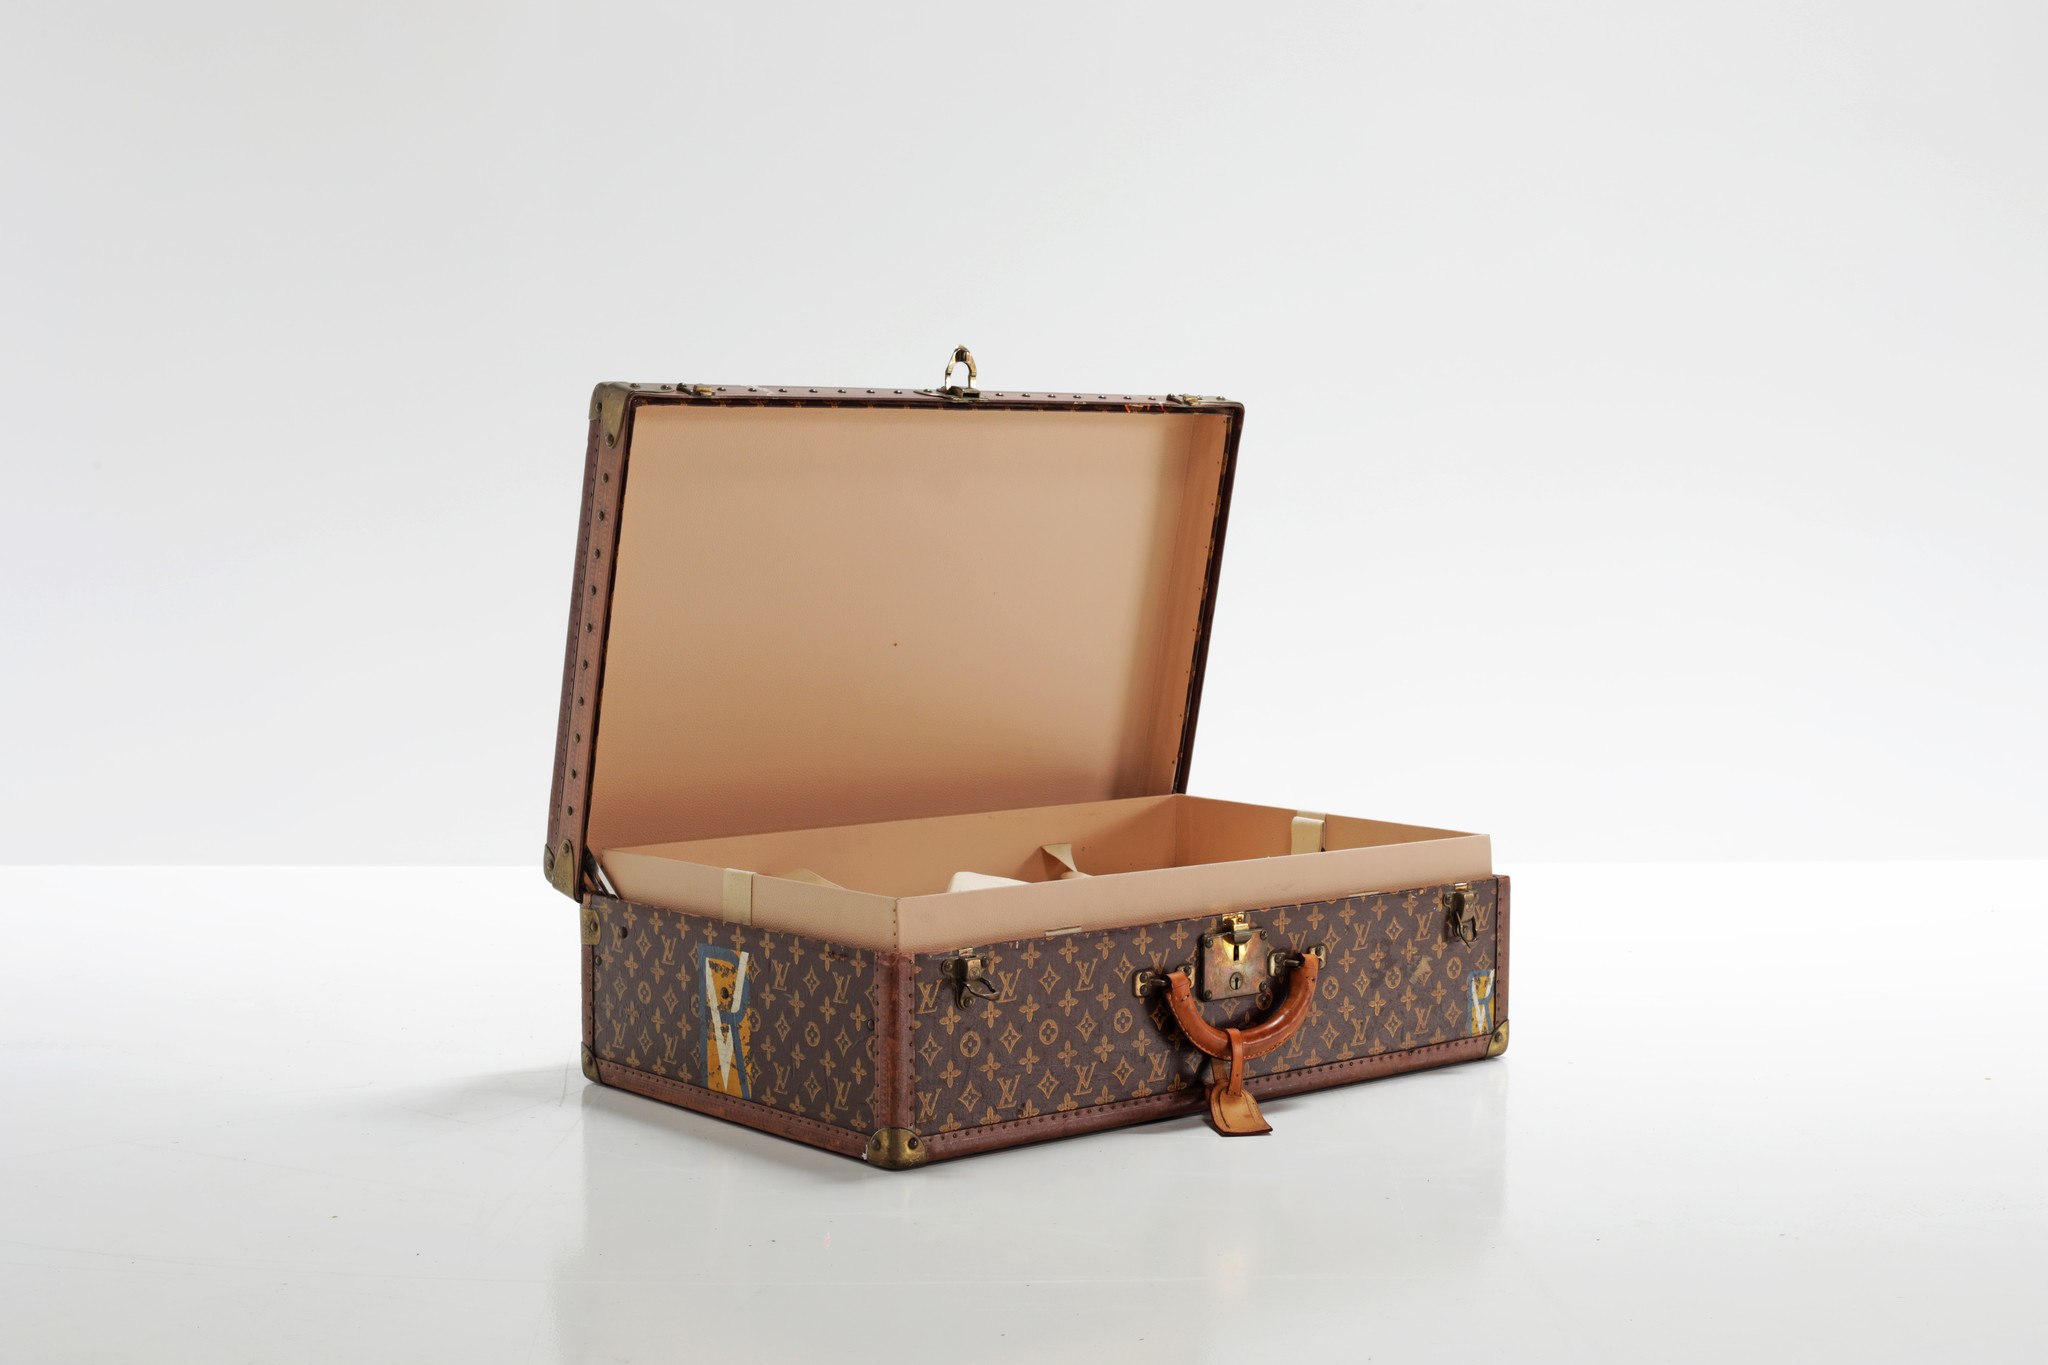 Louis Vuitton suitcase 1950 - THE HOUSE OF WAUW